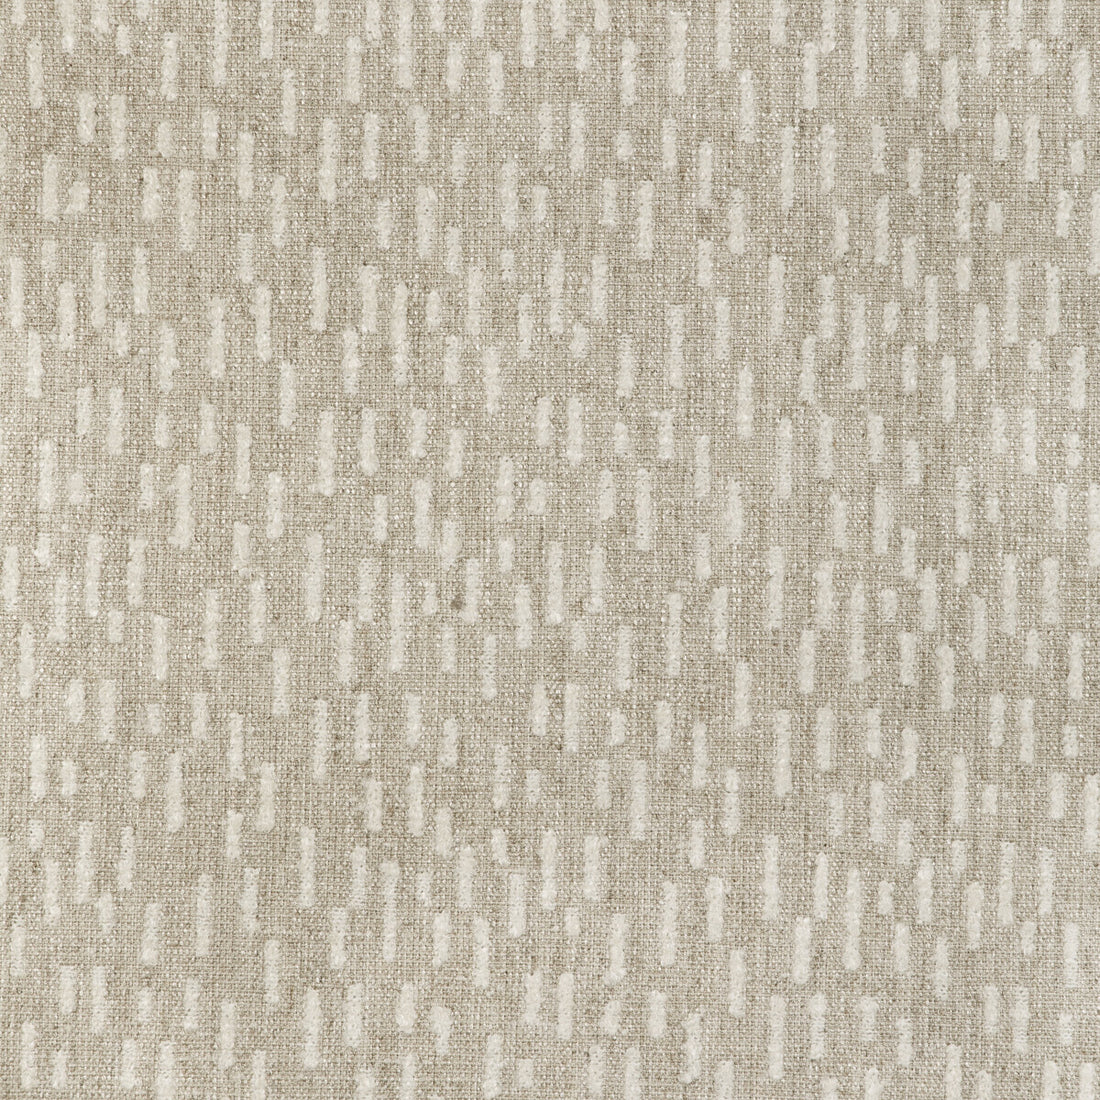 Slew fabric in oatmeal color - pattern GWF-3794.116.0 - by Lee Jofa Modern in the Kelly Wearstler VII collection